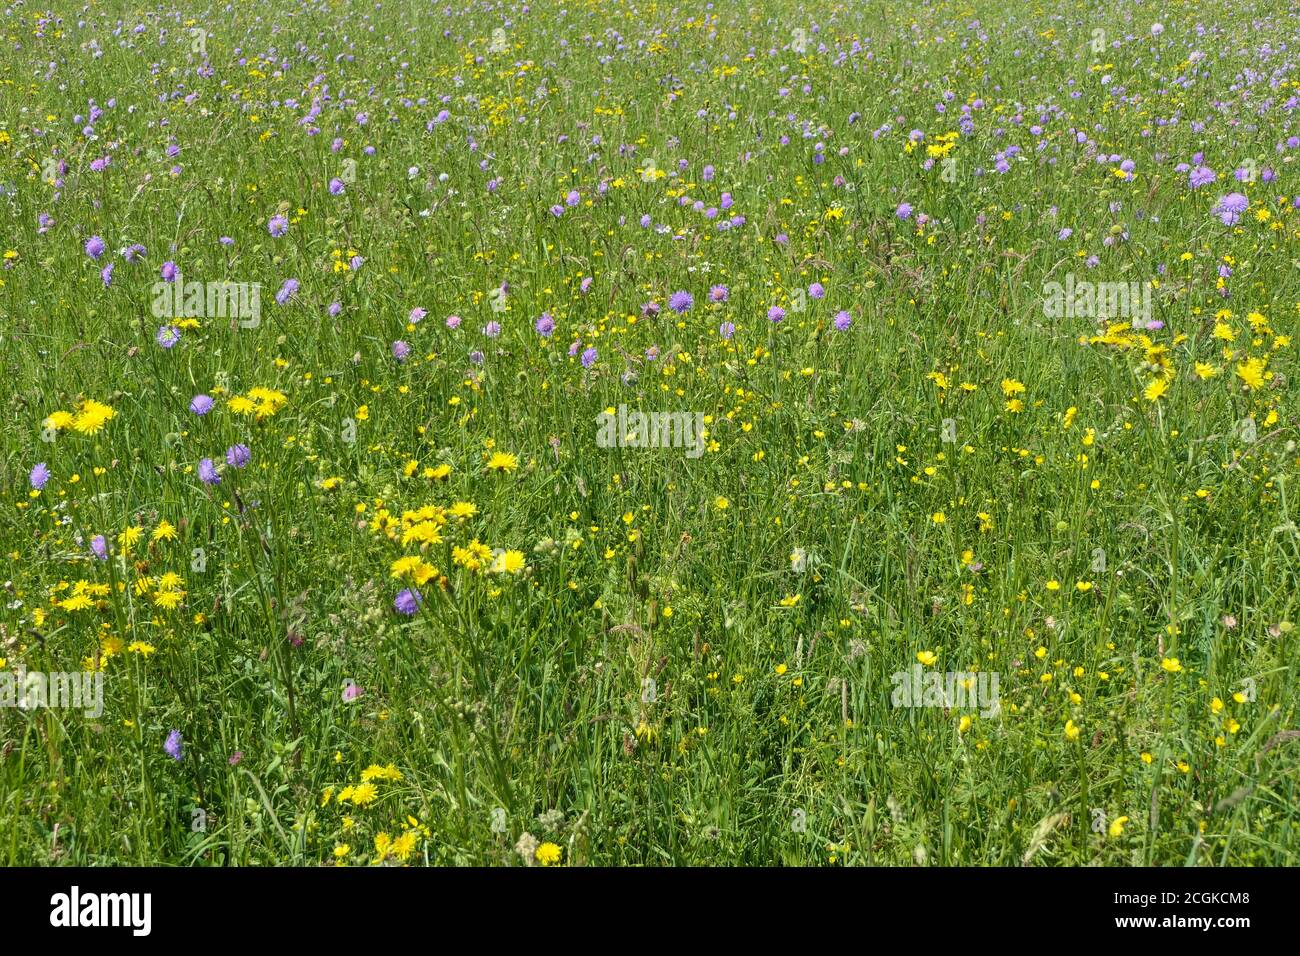 Cheerful fresh summer meadow with green grass yellow and purple flowers Stock Photo